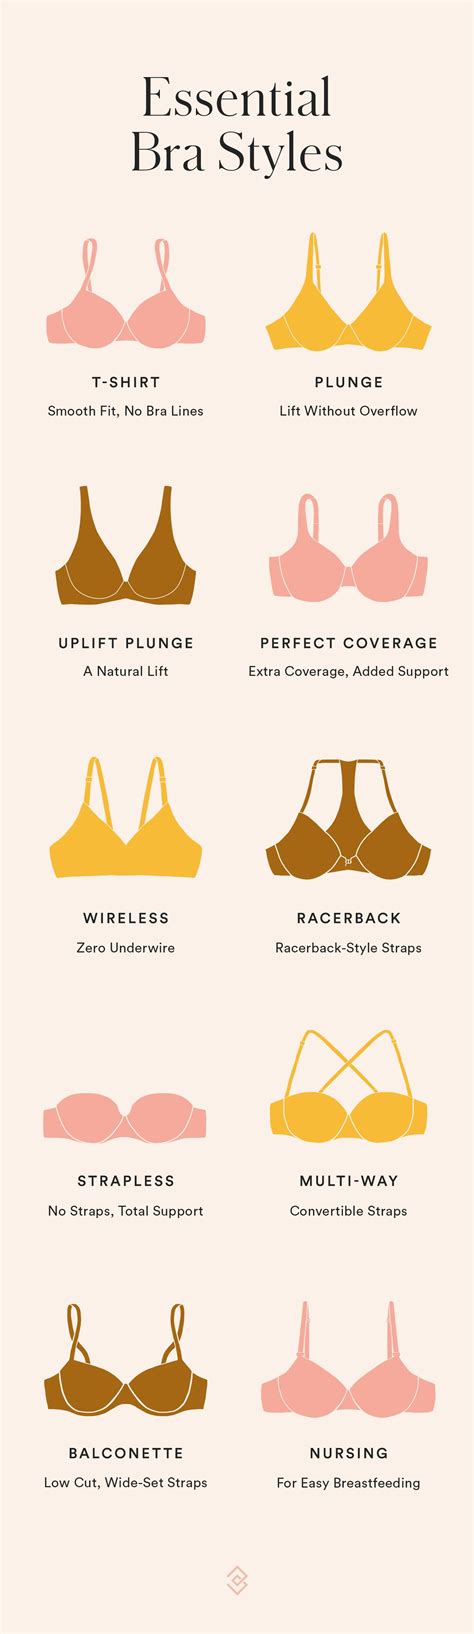 Bra Style Guide Different Bra Types And Styles For Your Breast Shape